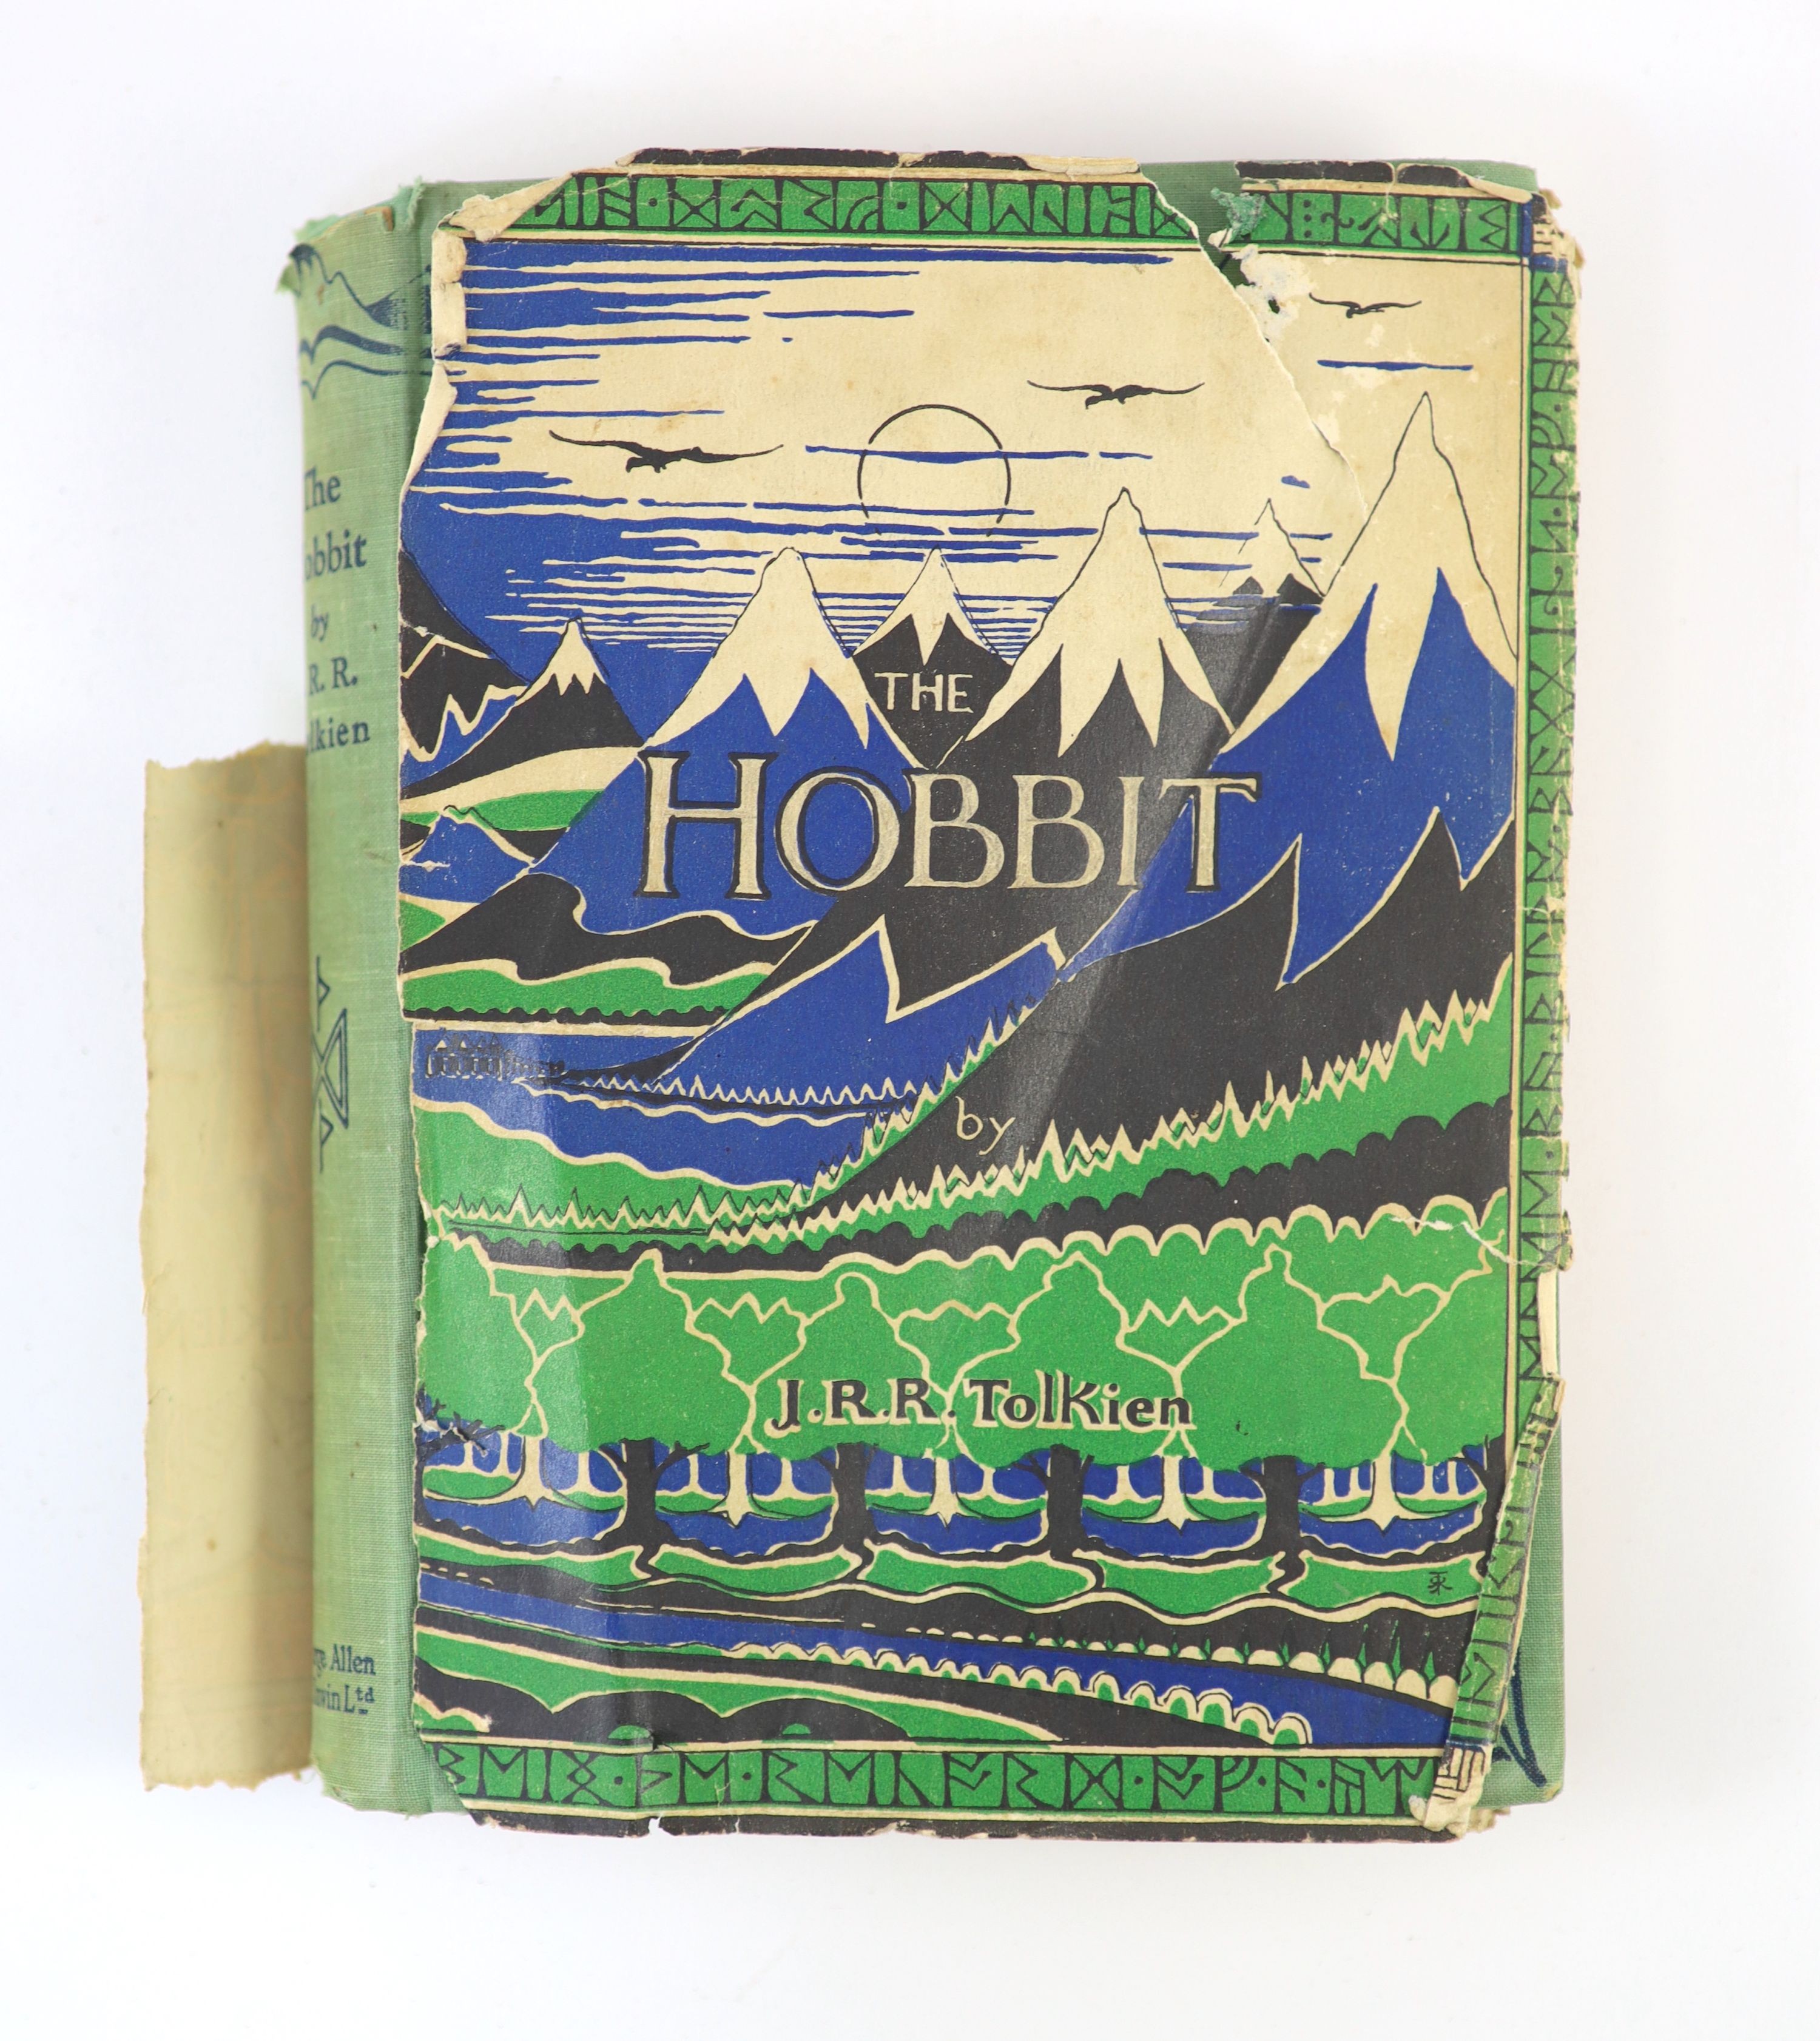 Tolkien, John Ronald Reuel (1892-1973) - The Hobbit or There and Back Again, 1st edition, 1st impression, with 1st impression dust jacket, with the word ‘’Dodgeson’’ hand corrected, with an ink mark through the ‘’e’’, th